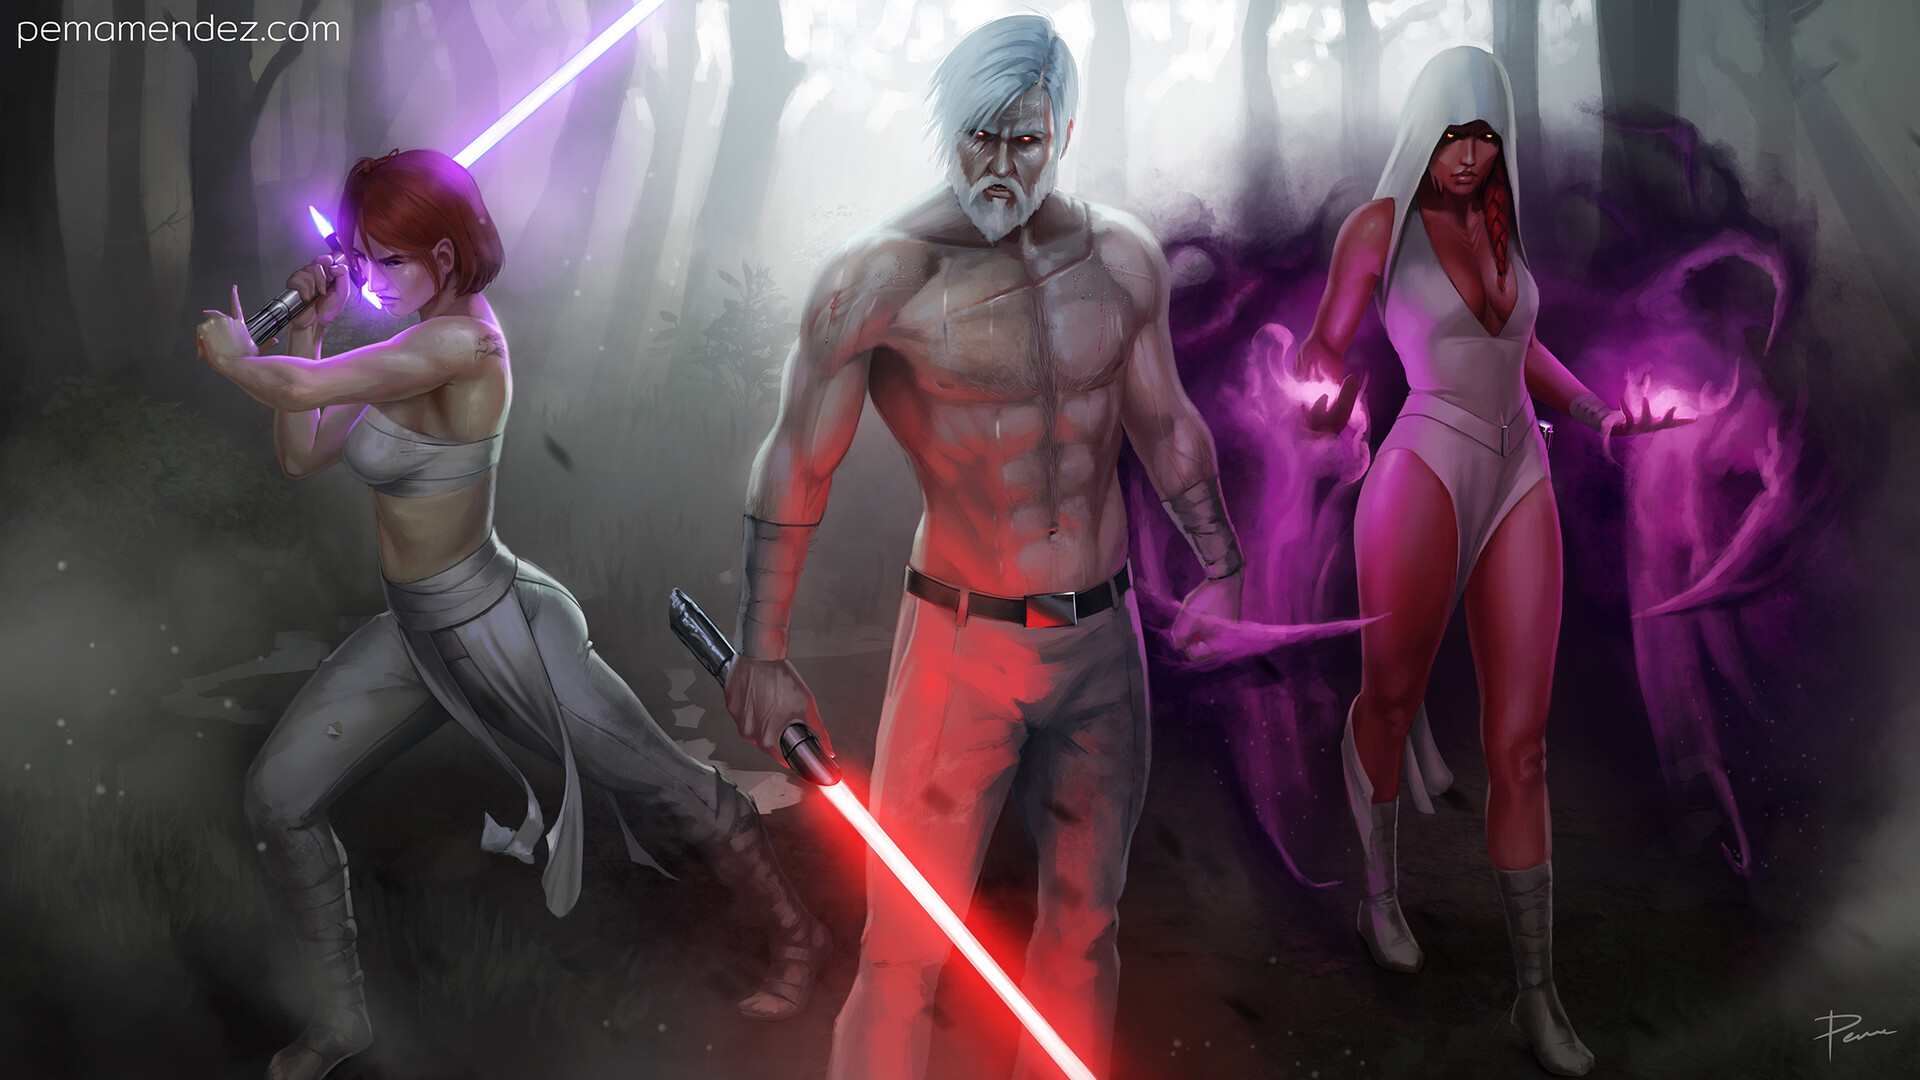 Commission I worked on some time ago of three star wars characters. 